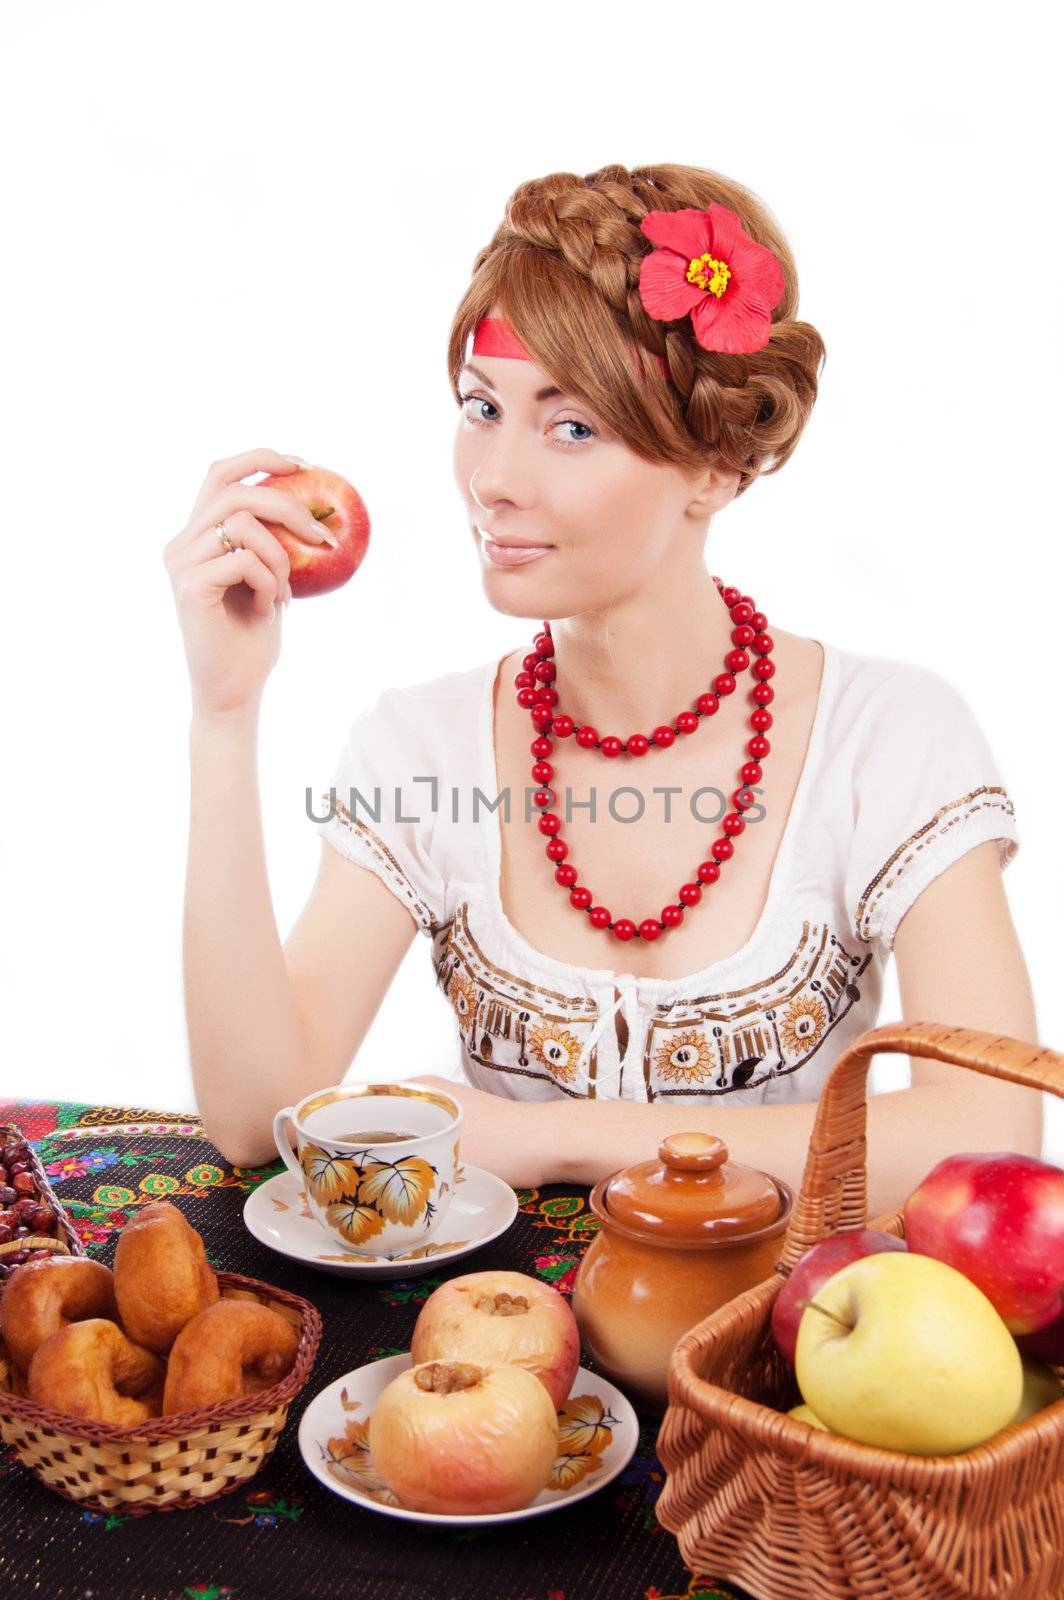 Russian woman eating apples at table by Angel_a